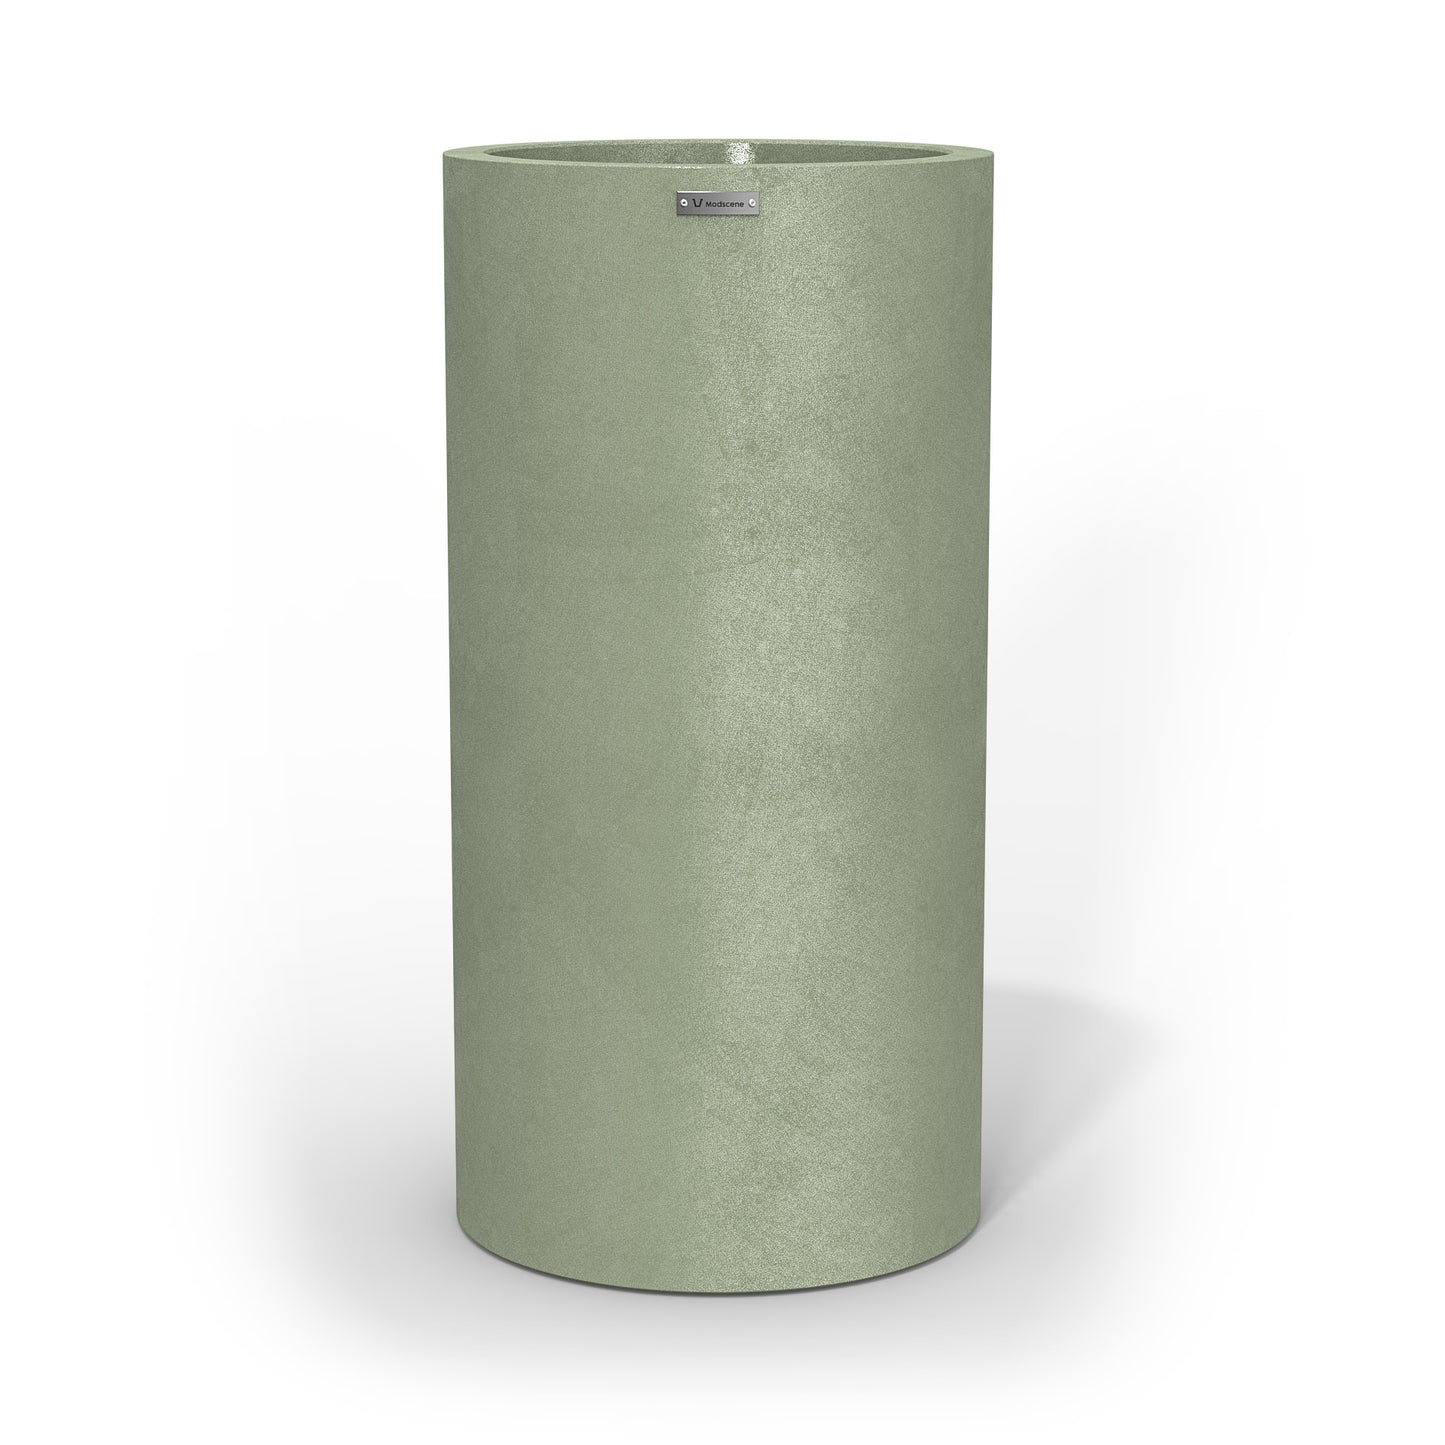 A tall cylinder planter pot in a pastel green colour with a concrete look finish.